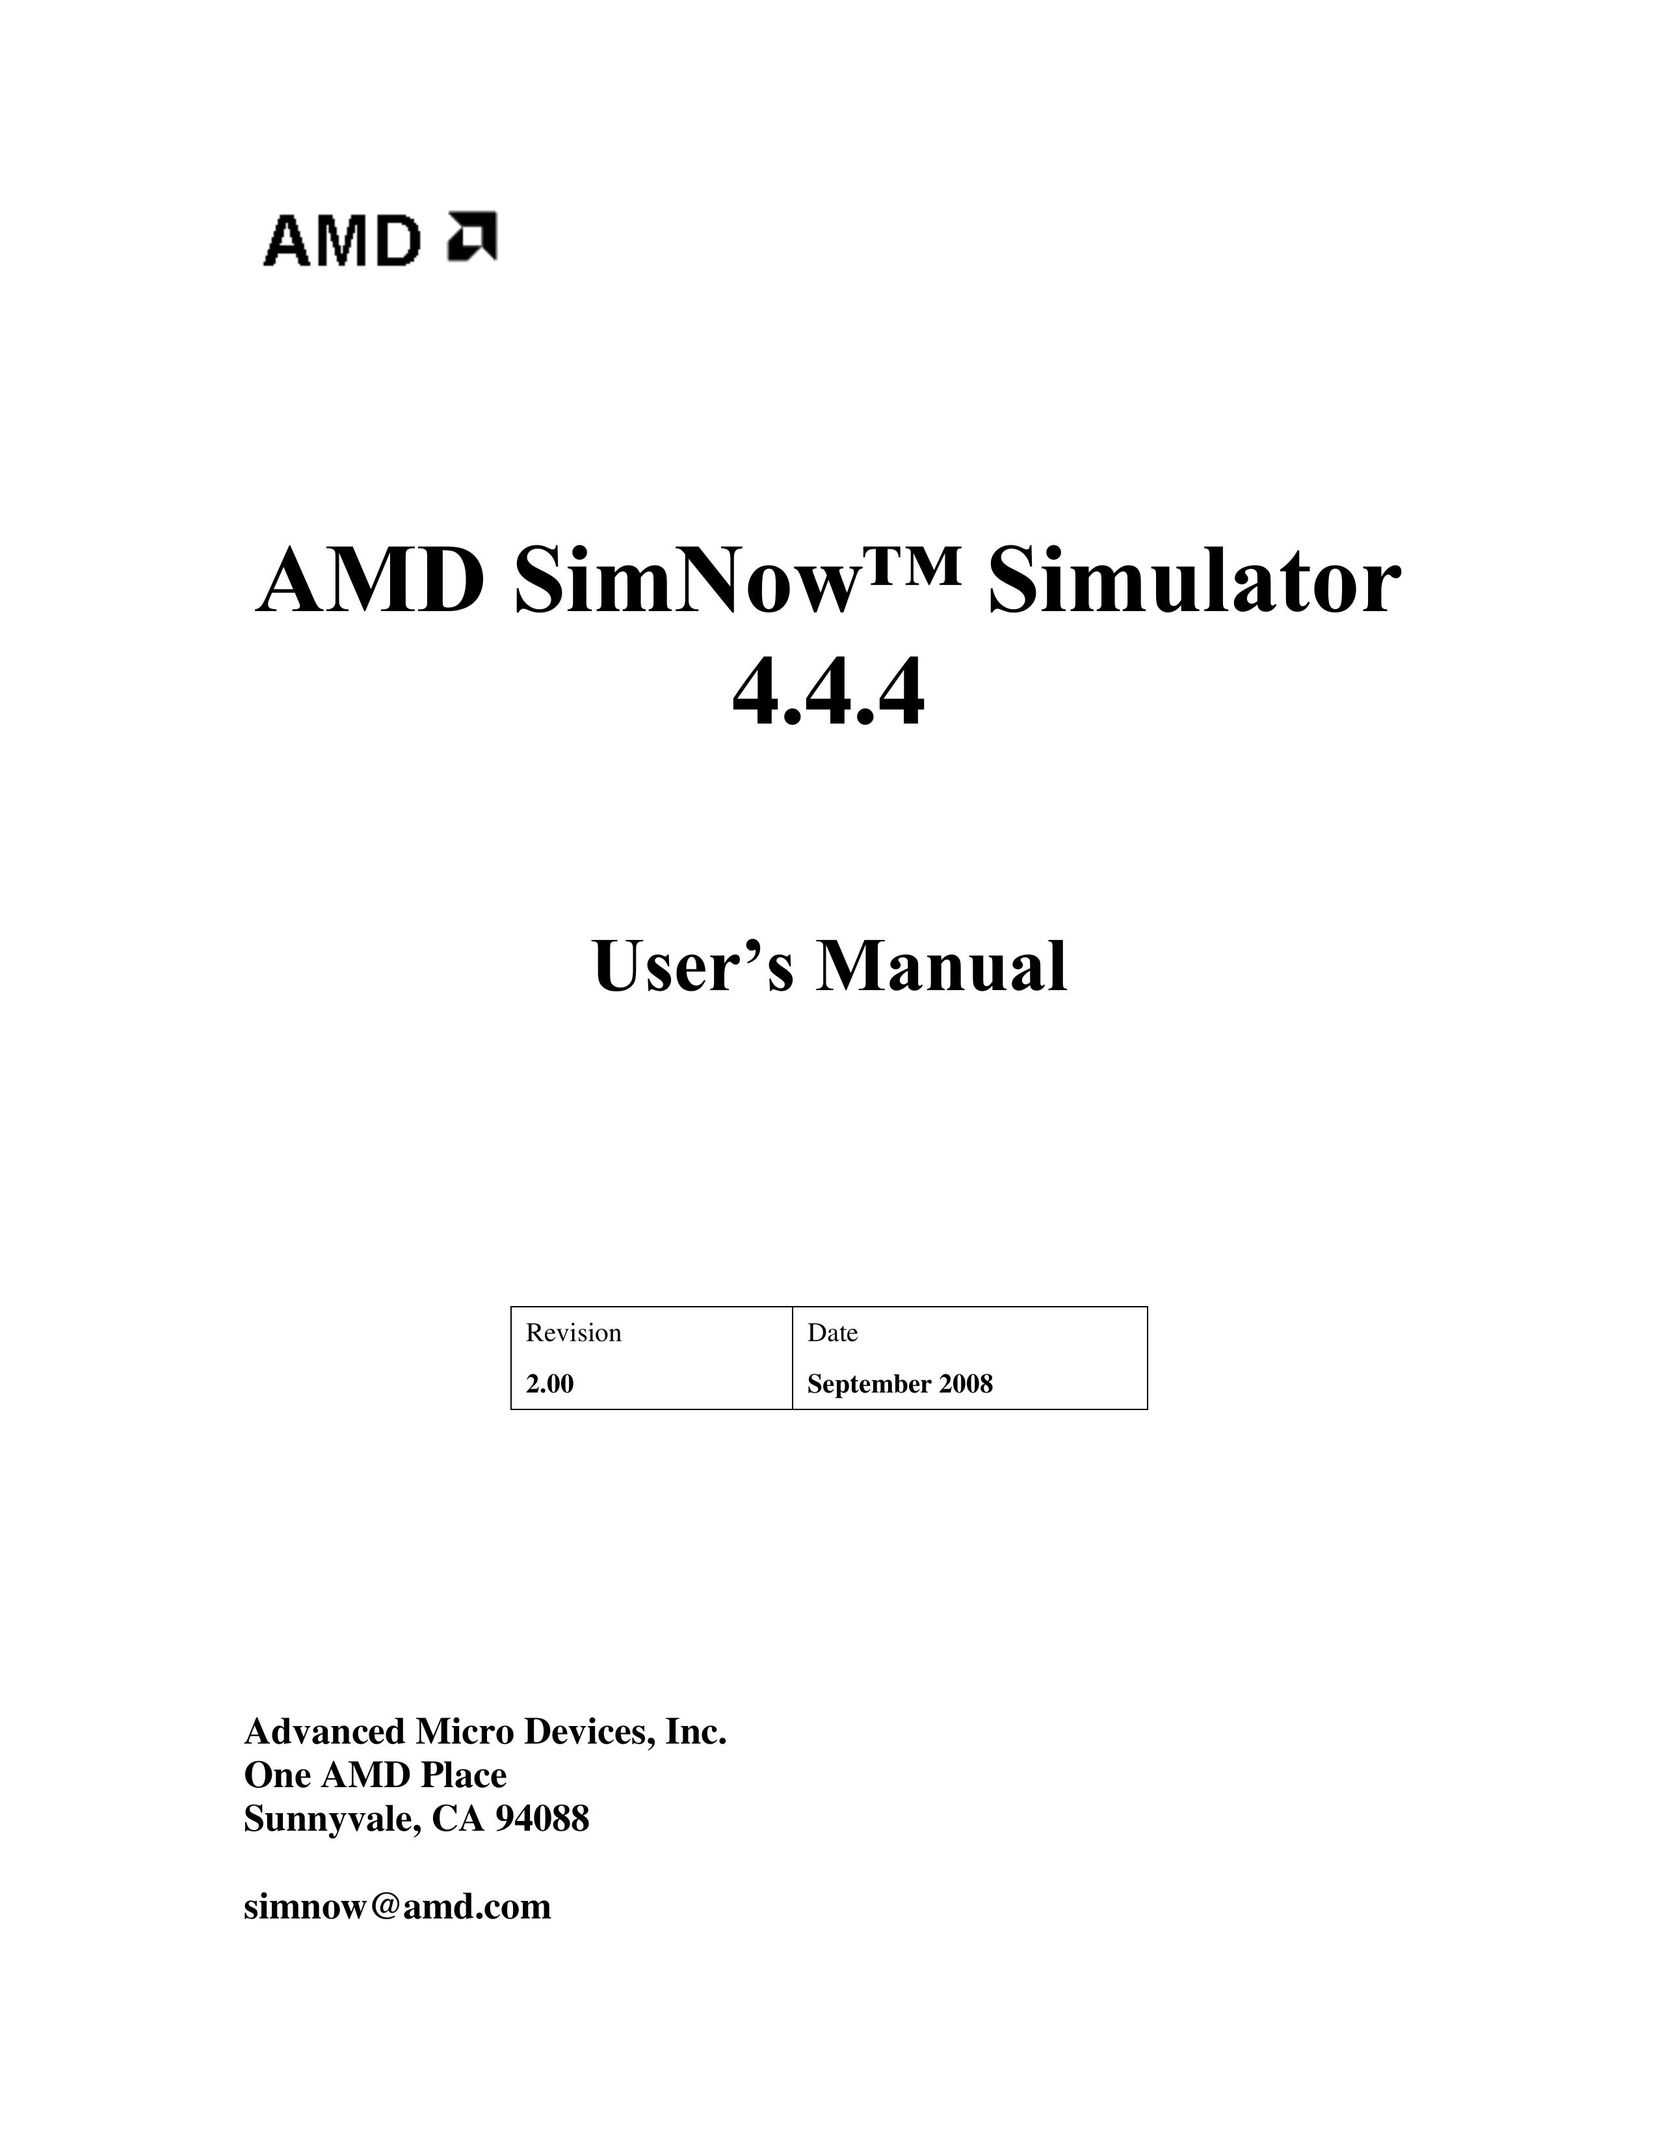 AMD 4.4.4 Network Router User Manual